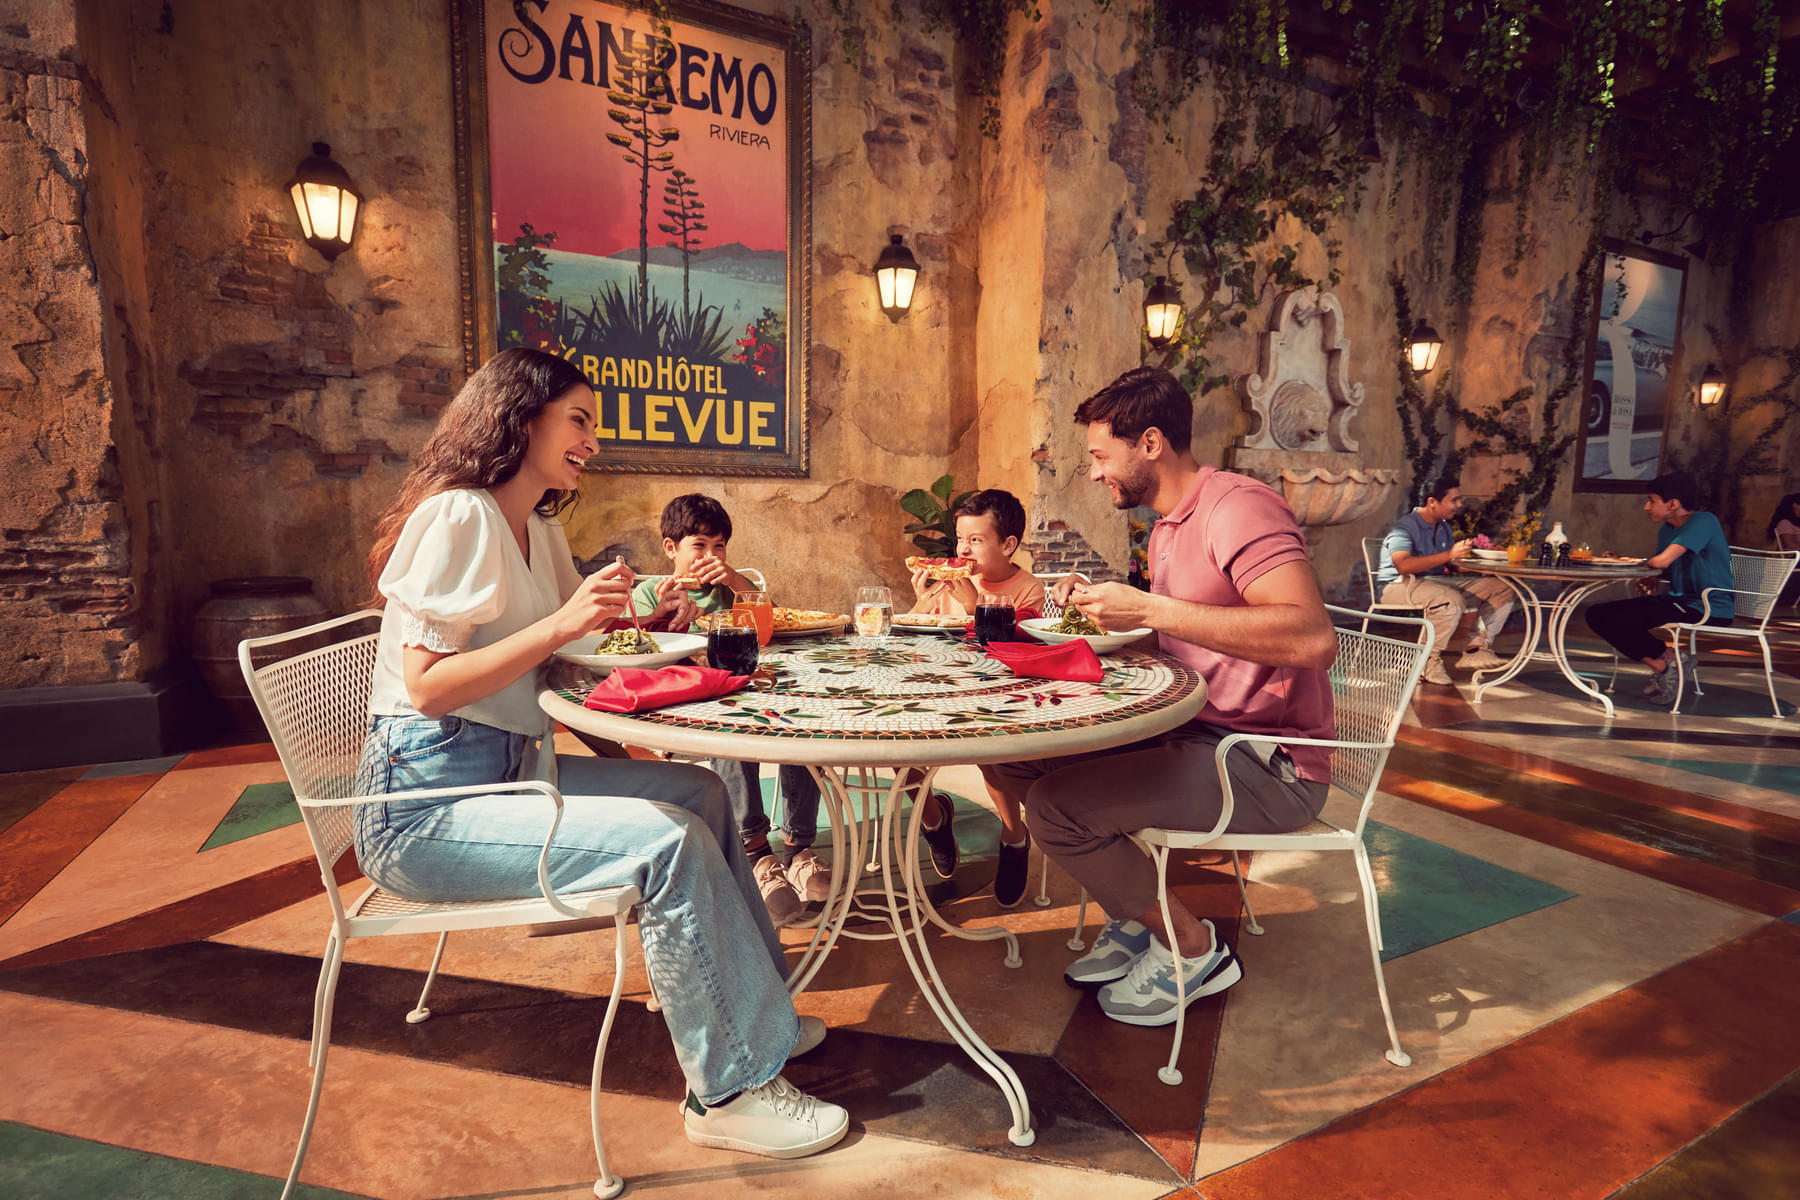 Indulge in various food options at the restaurants in the theme park